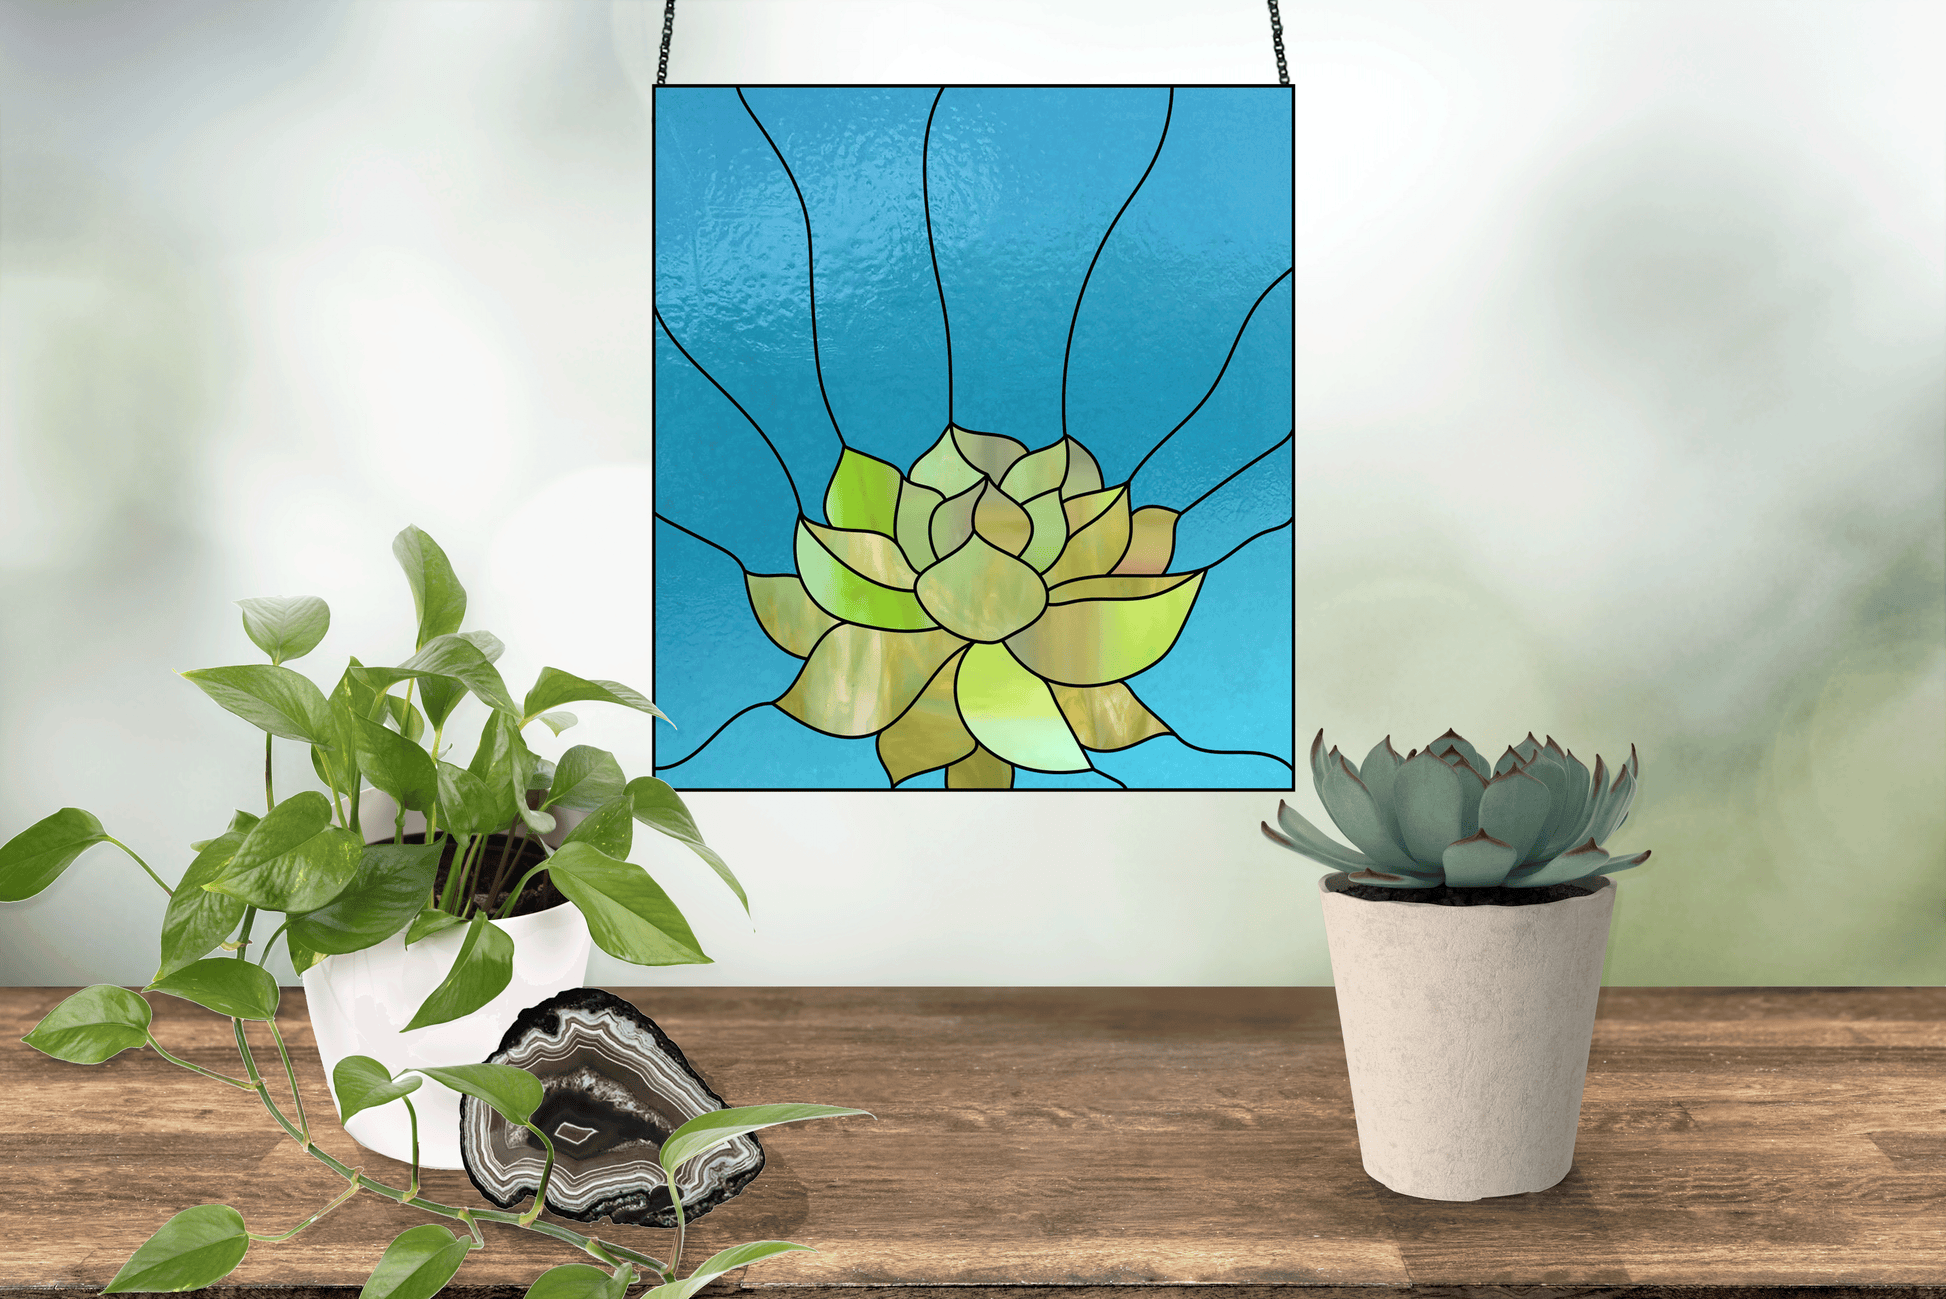 Unique stained glass pattern for an echeveria succulent panel, instant PDF download, shown in a window with plants